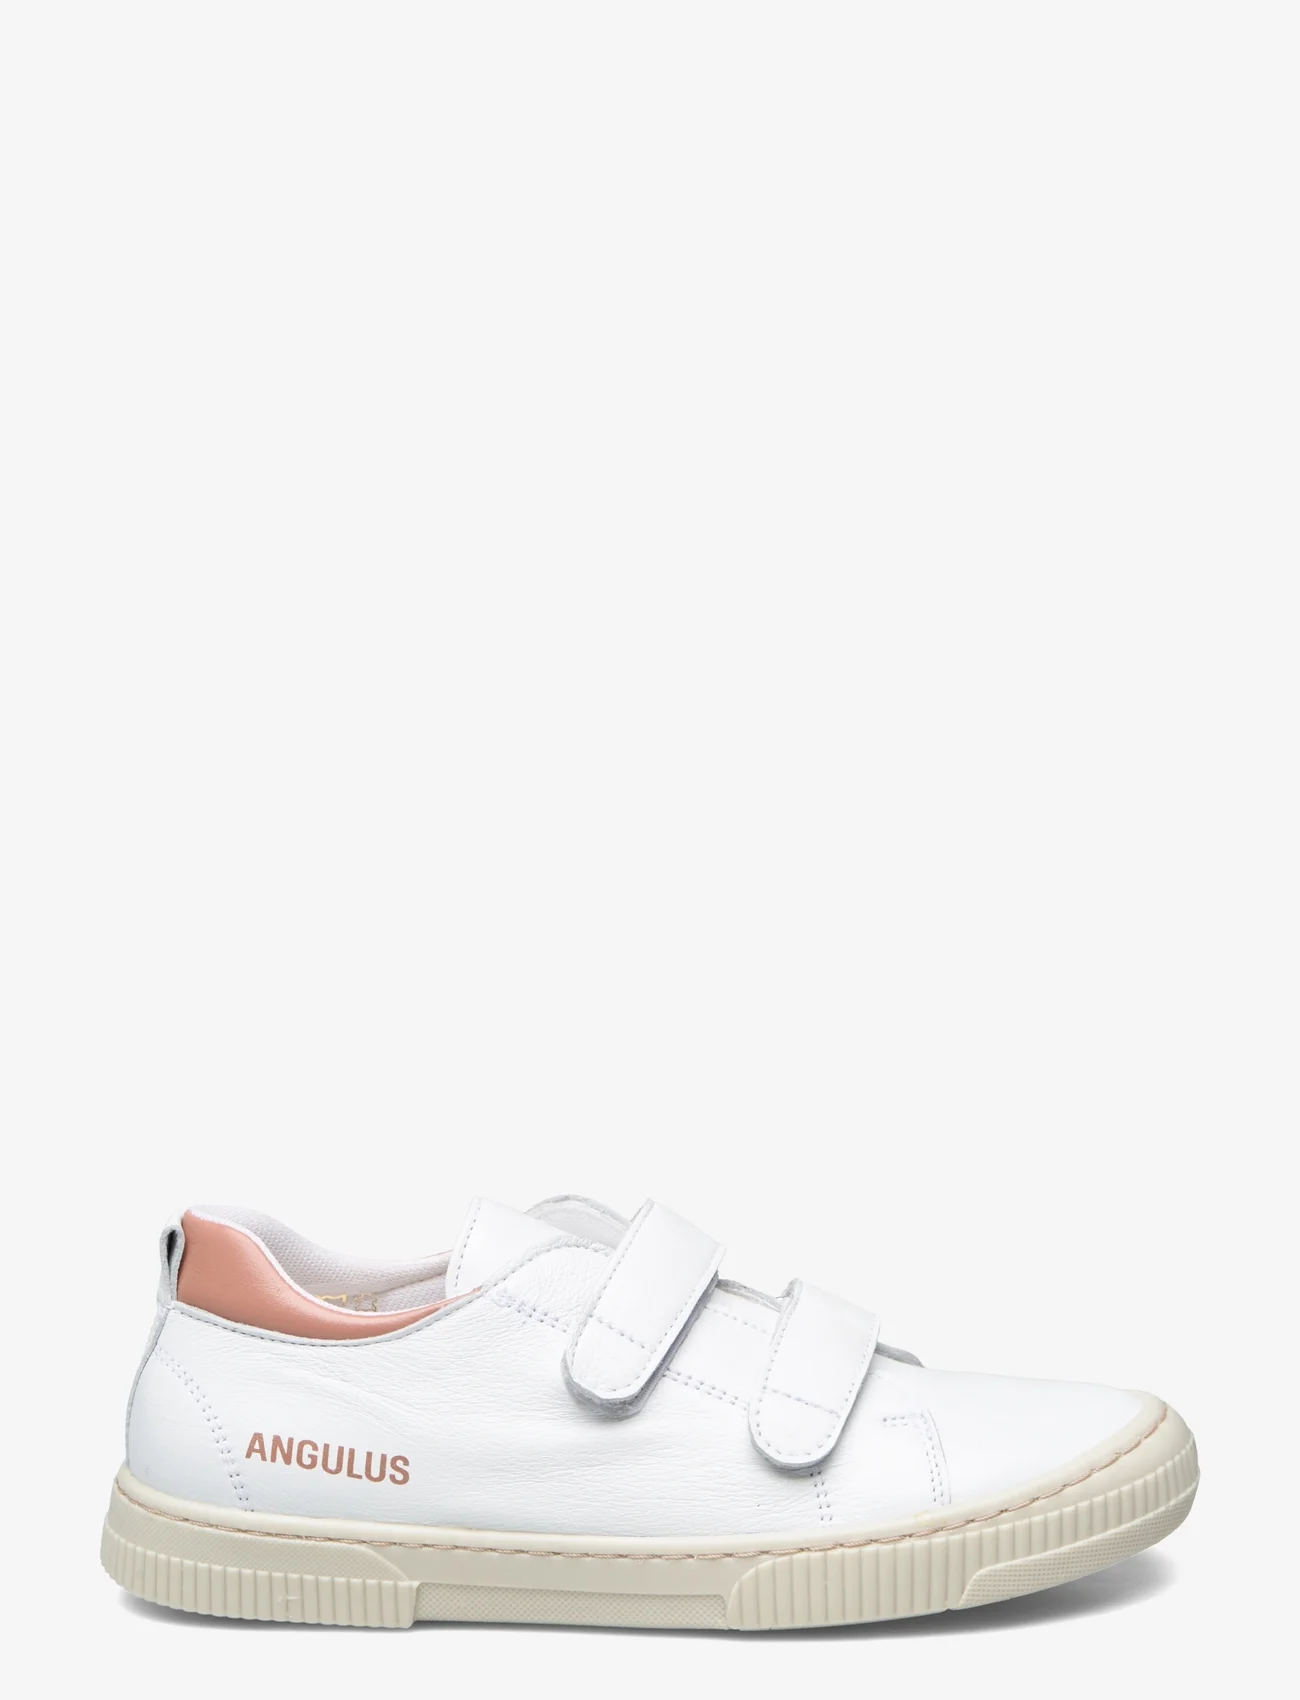 ANGULUS - Shoes - flat - with velcro - sommarfynd - 1521/1470 white/d.peach - 1